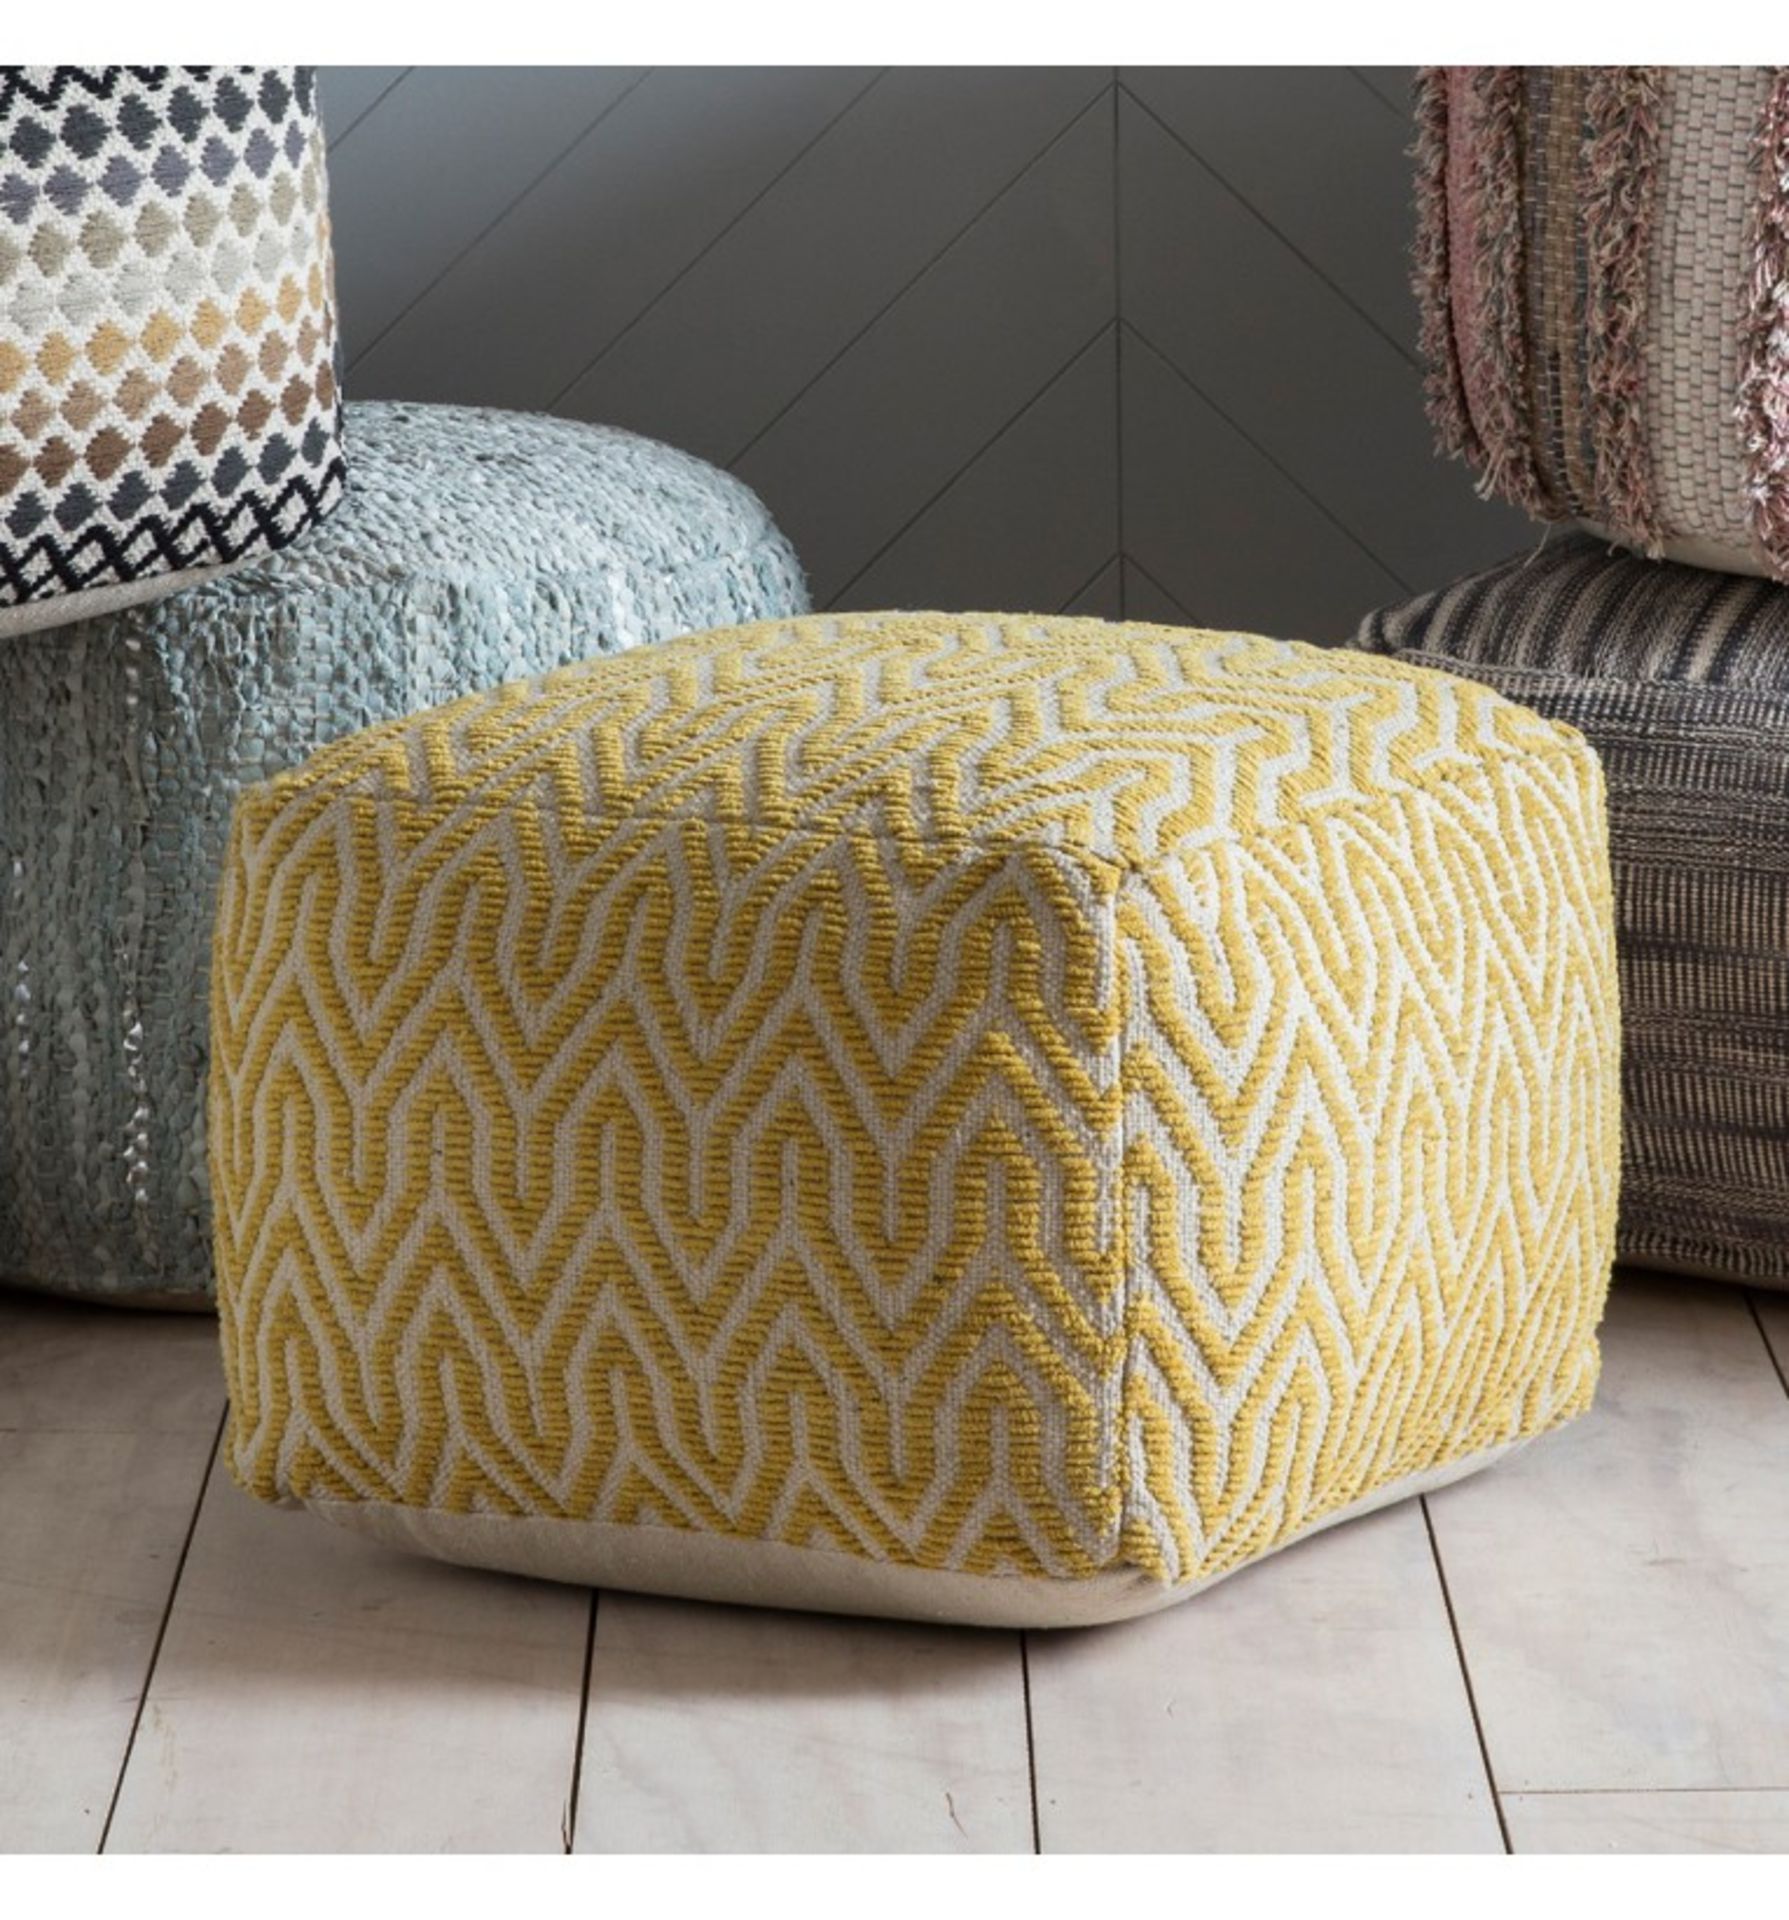 Stromstad Pouffe Ochre Practical and stylish, this all over geometric pouffe features a bold ochre